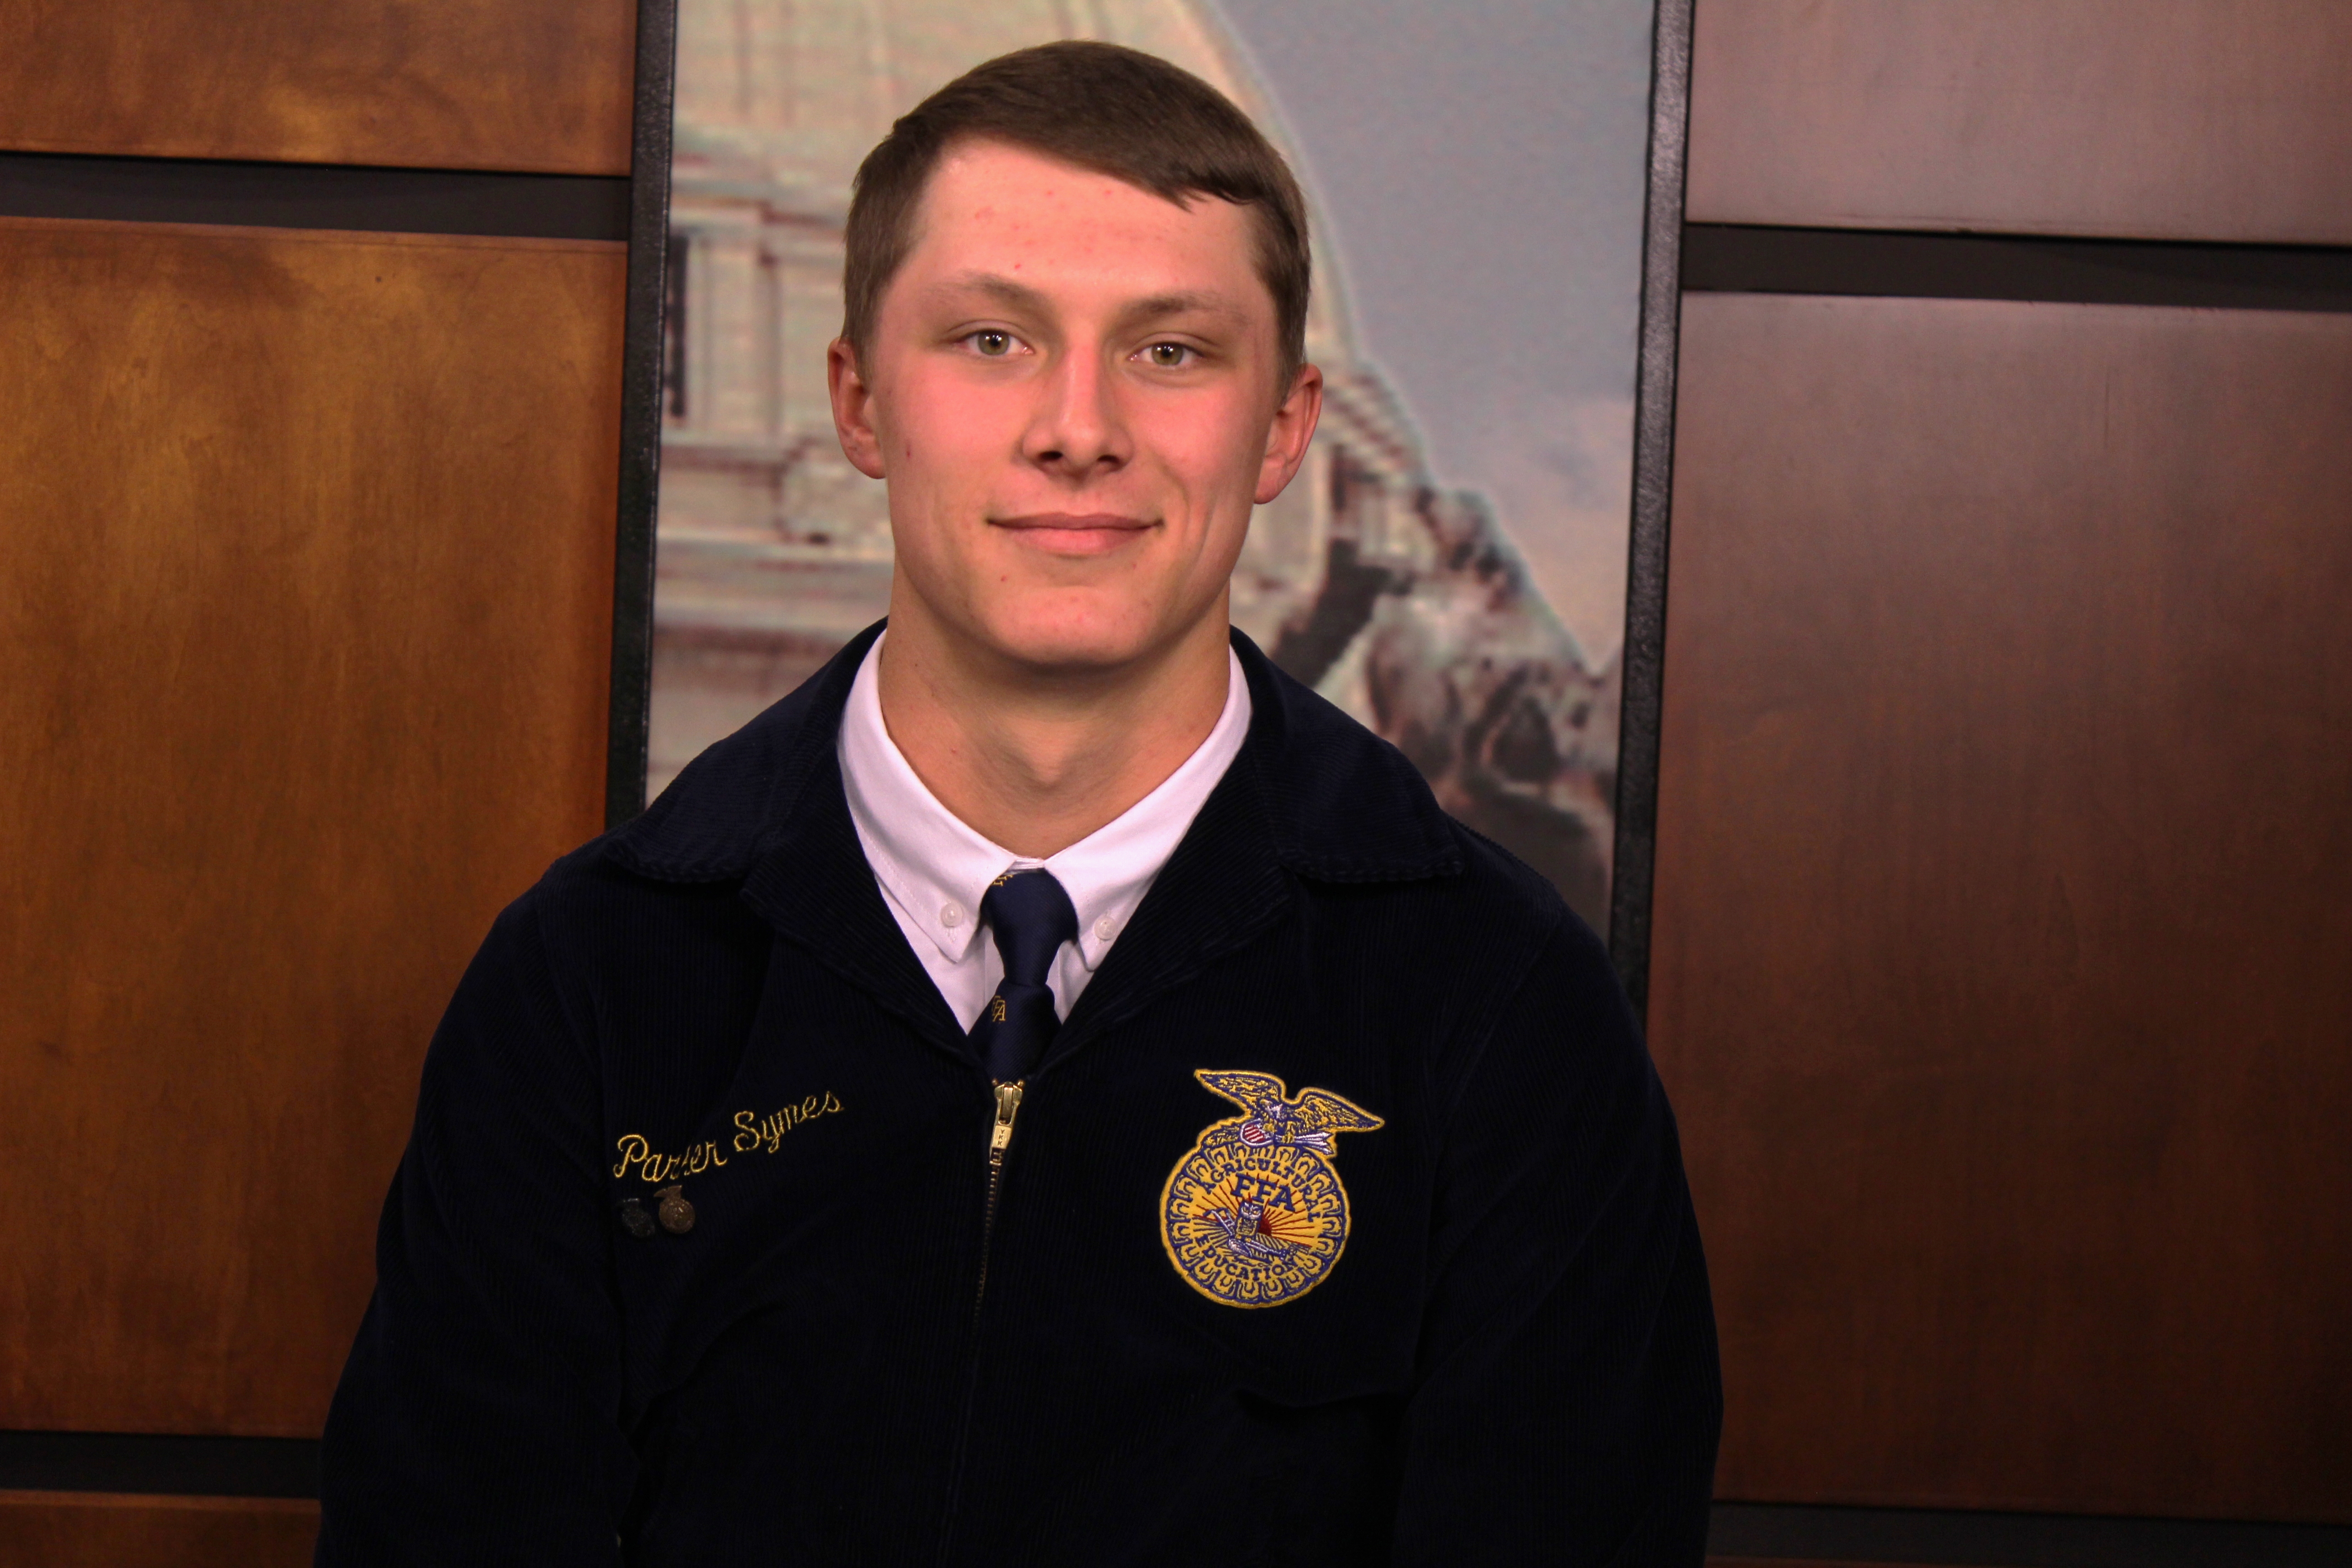 Introducing Parker Symes of the Yukon FFA Chapter, Your 2022 Southwest Area Star in Agribusiness